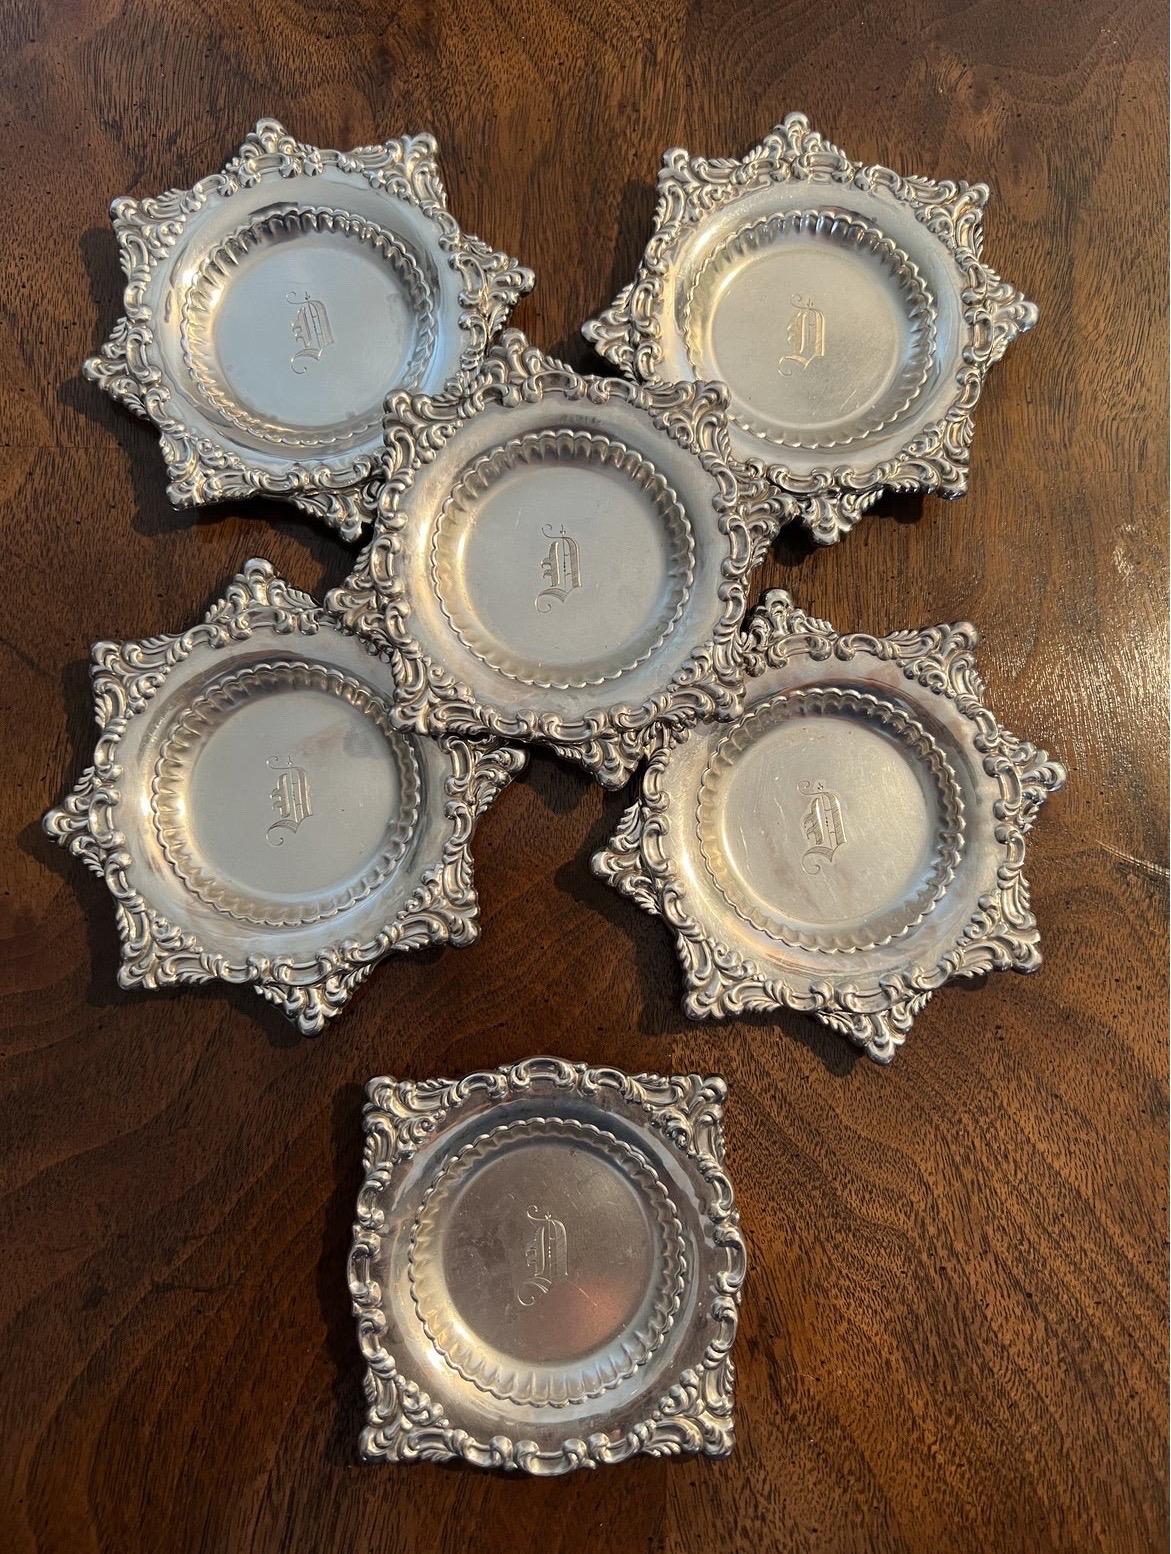 20th Century Antique Dominick & Haff “d” Monogram Sterling Silver Butter Pat Dishes, 11 Pc For Sale